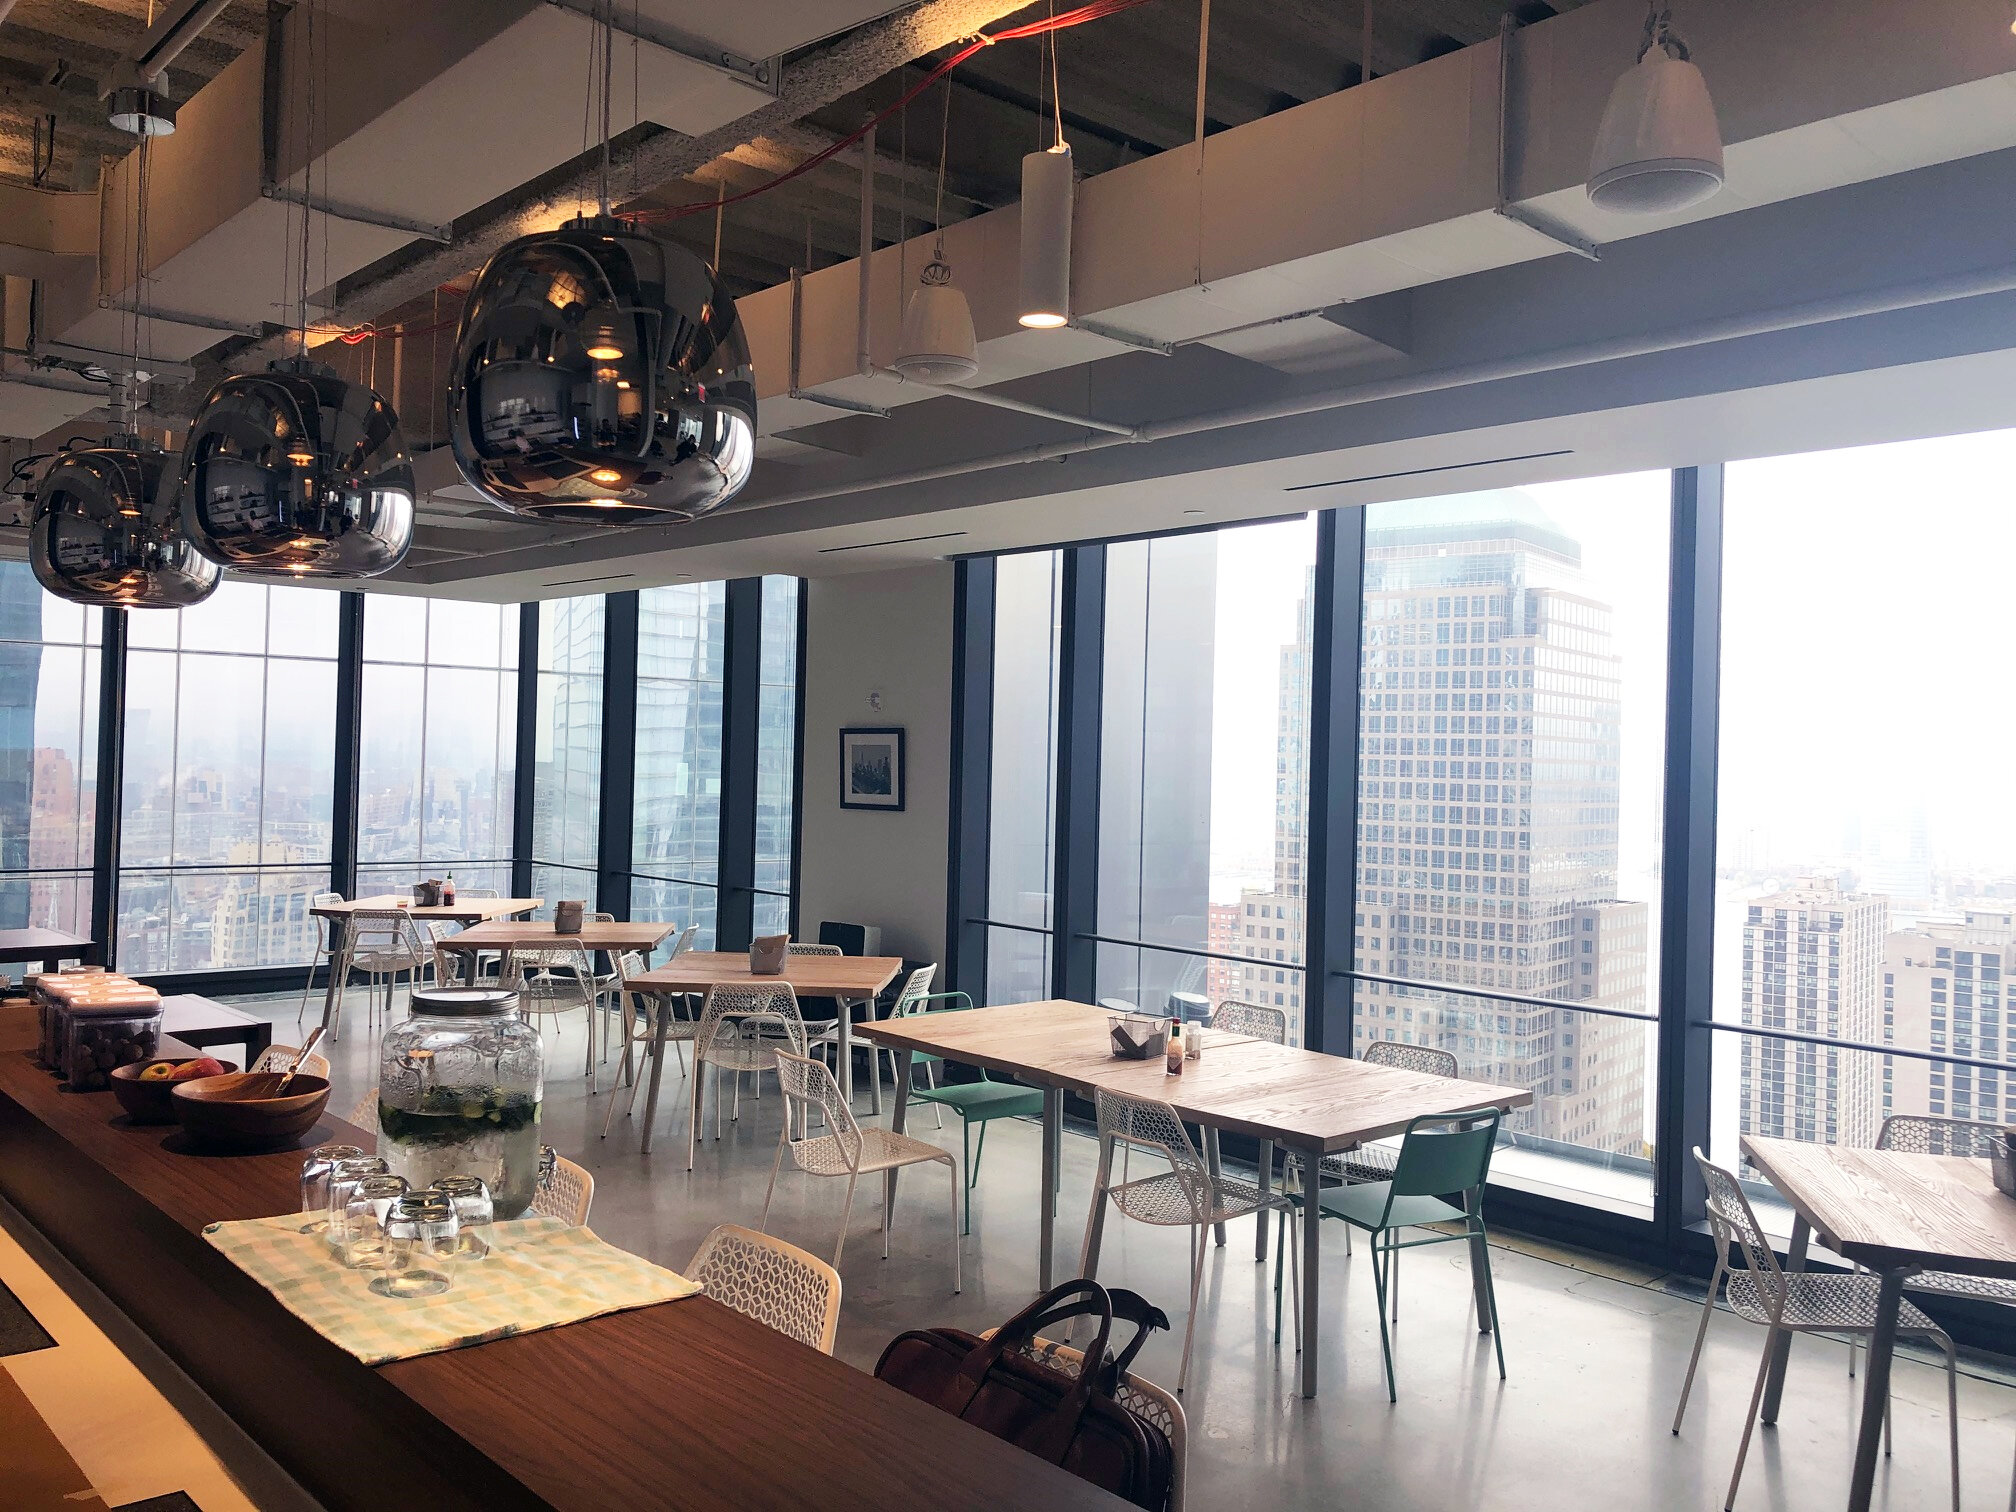 Pantry and cafe at the 3 WTC Asana office with MEP-FP engineering services provided by 2L Engineering.